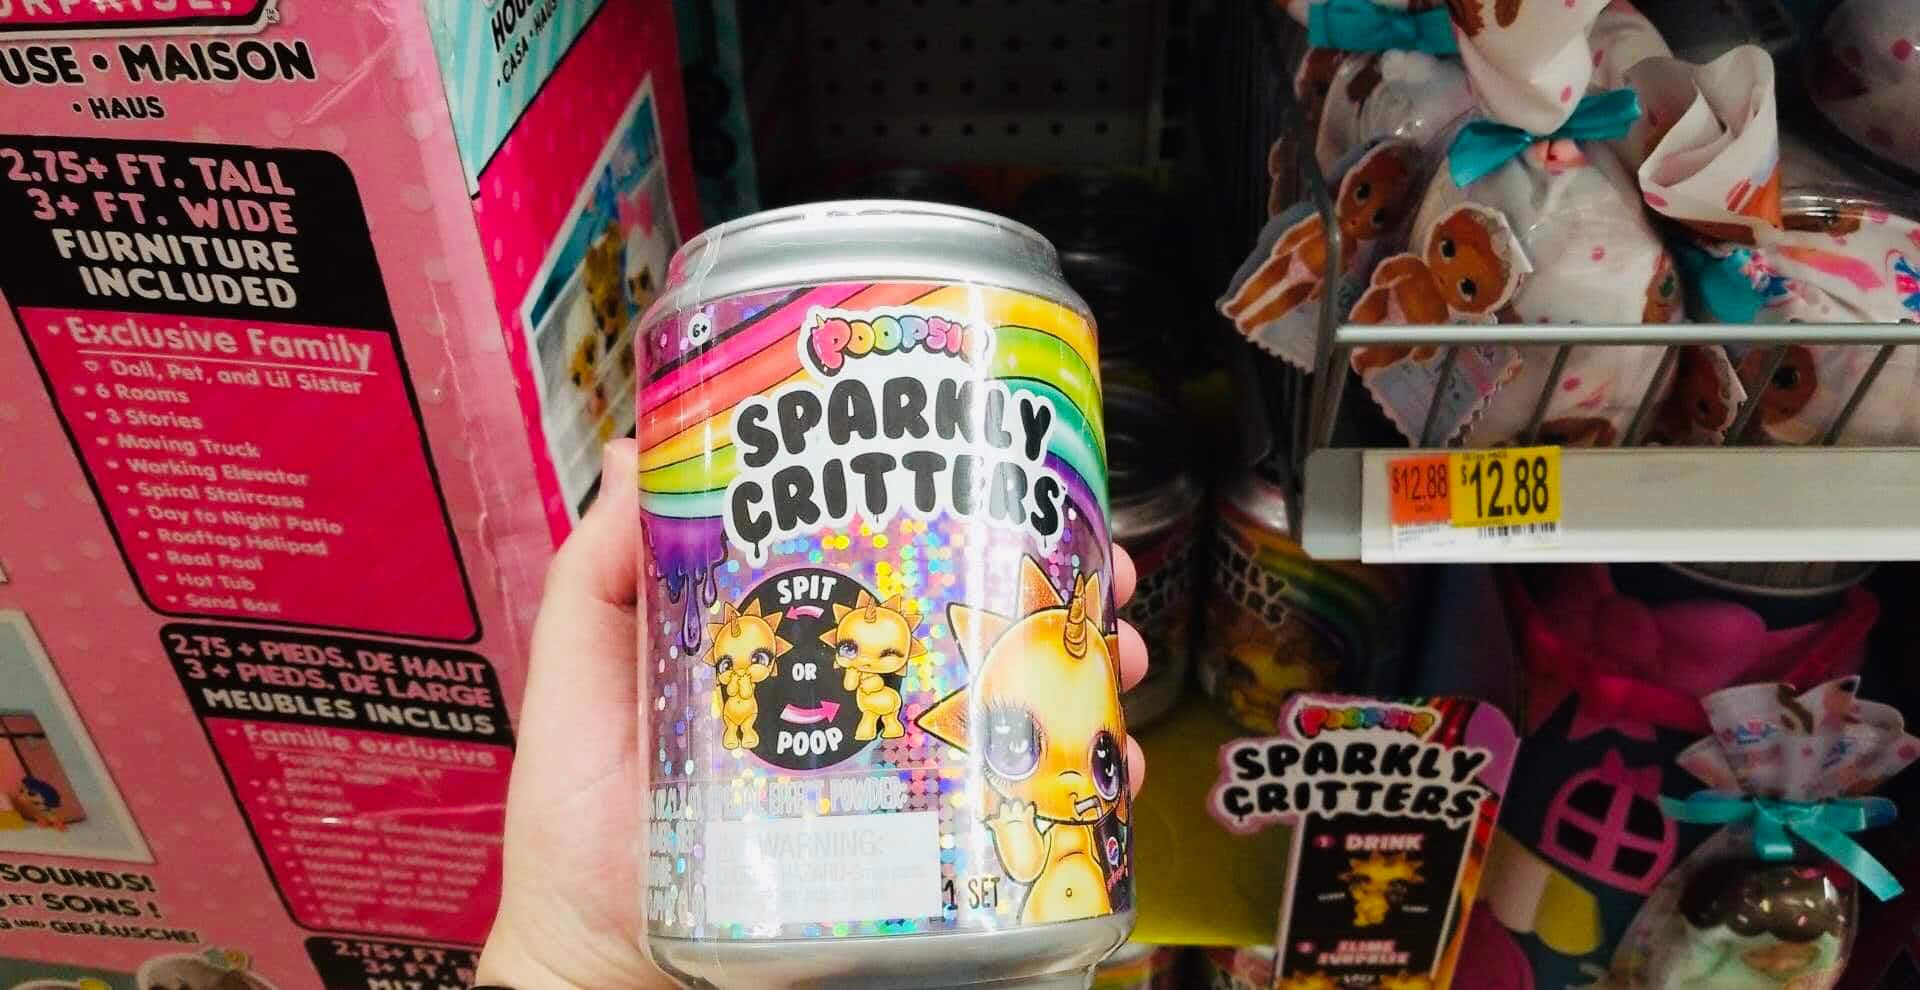 LOL Surprise toy look a like called Sparkly Critters